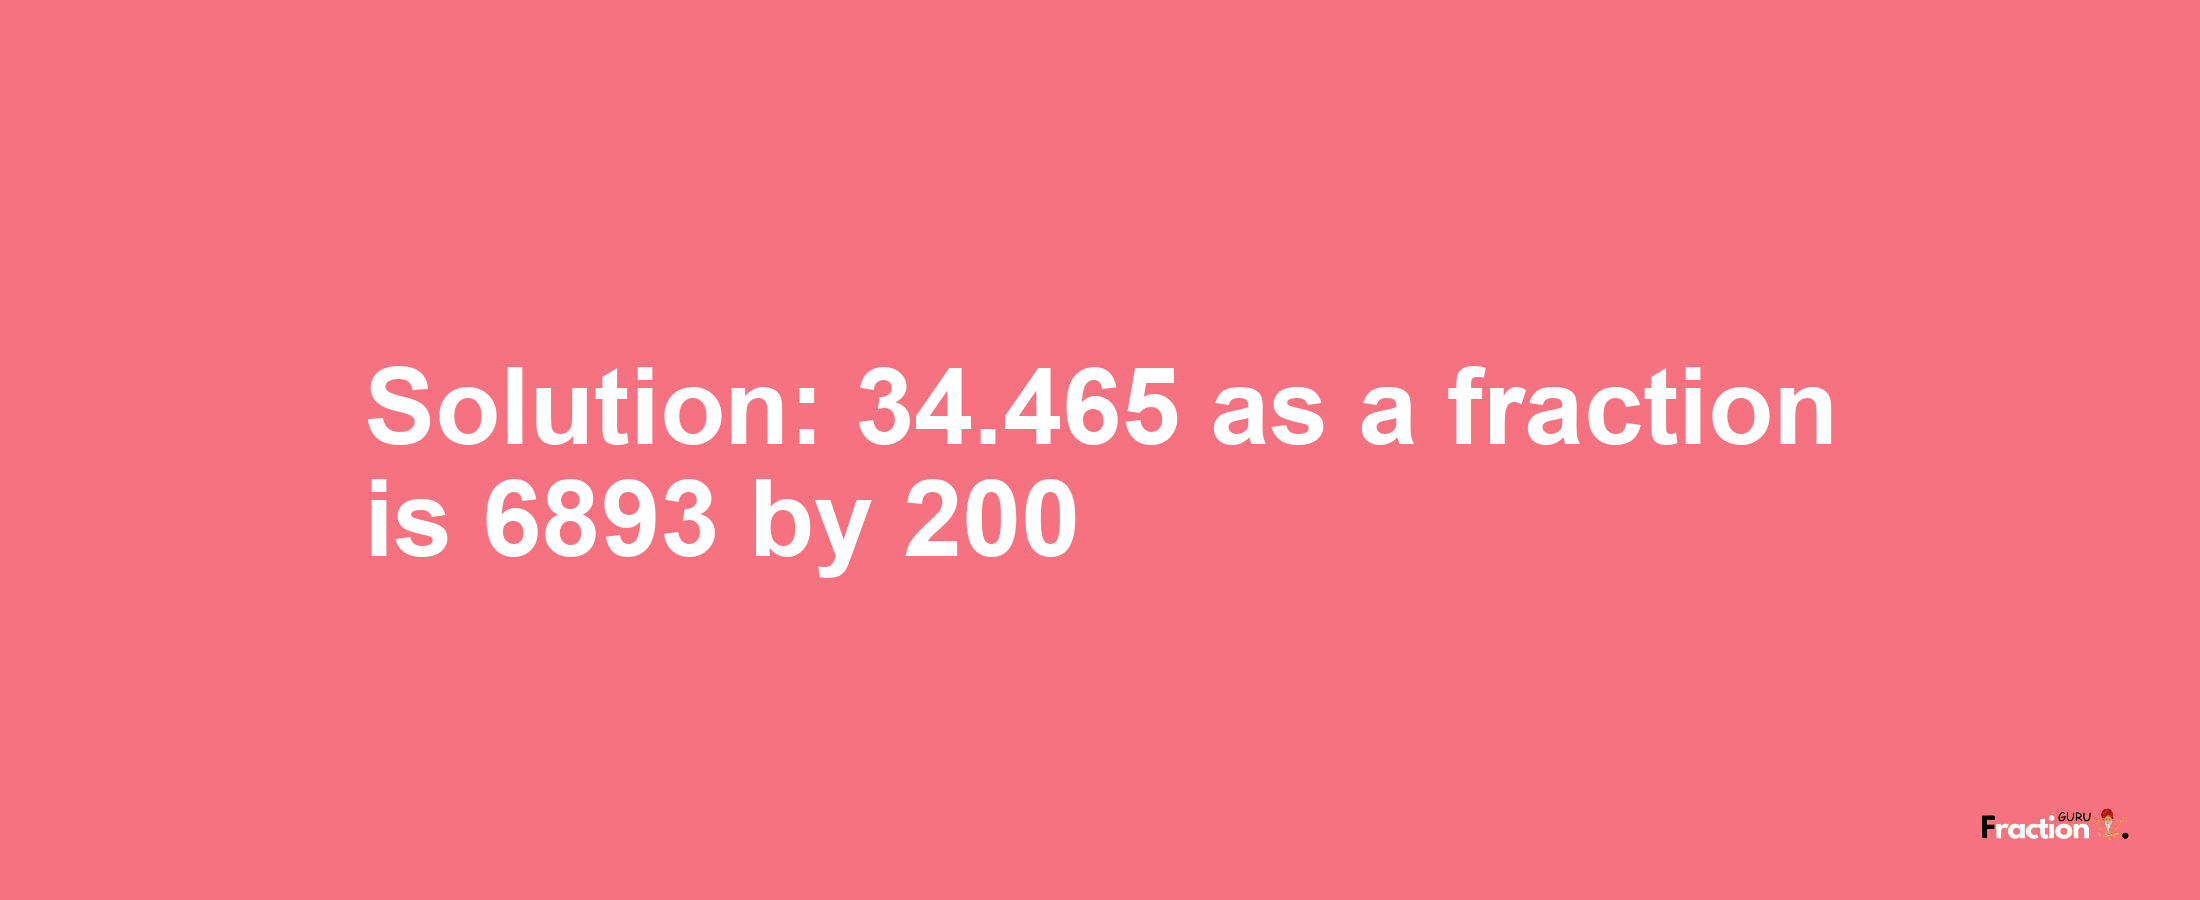 Solution:34.465 as a fraction is 6893/200